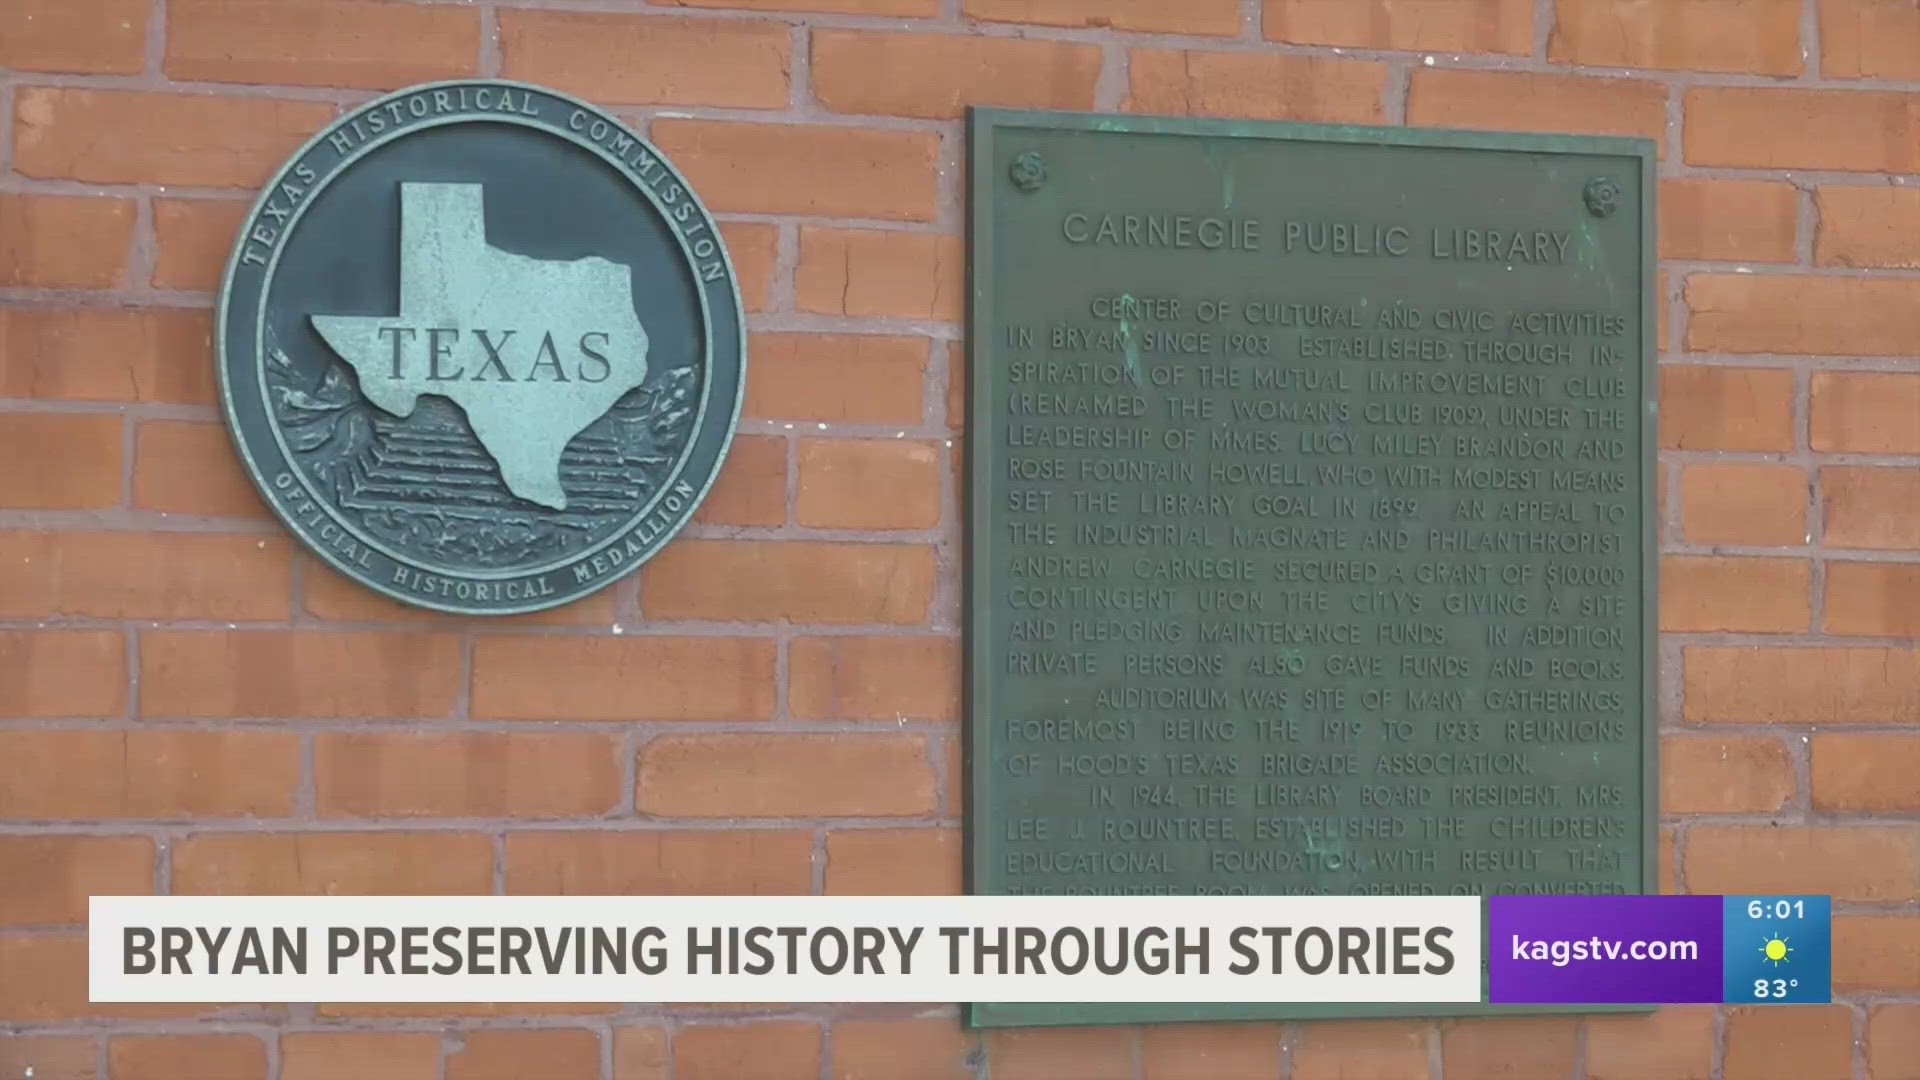 During Historic Preservation Month, the City of Bryan wants residents to preserve their stories in the city's history.